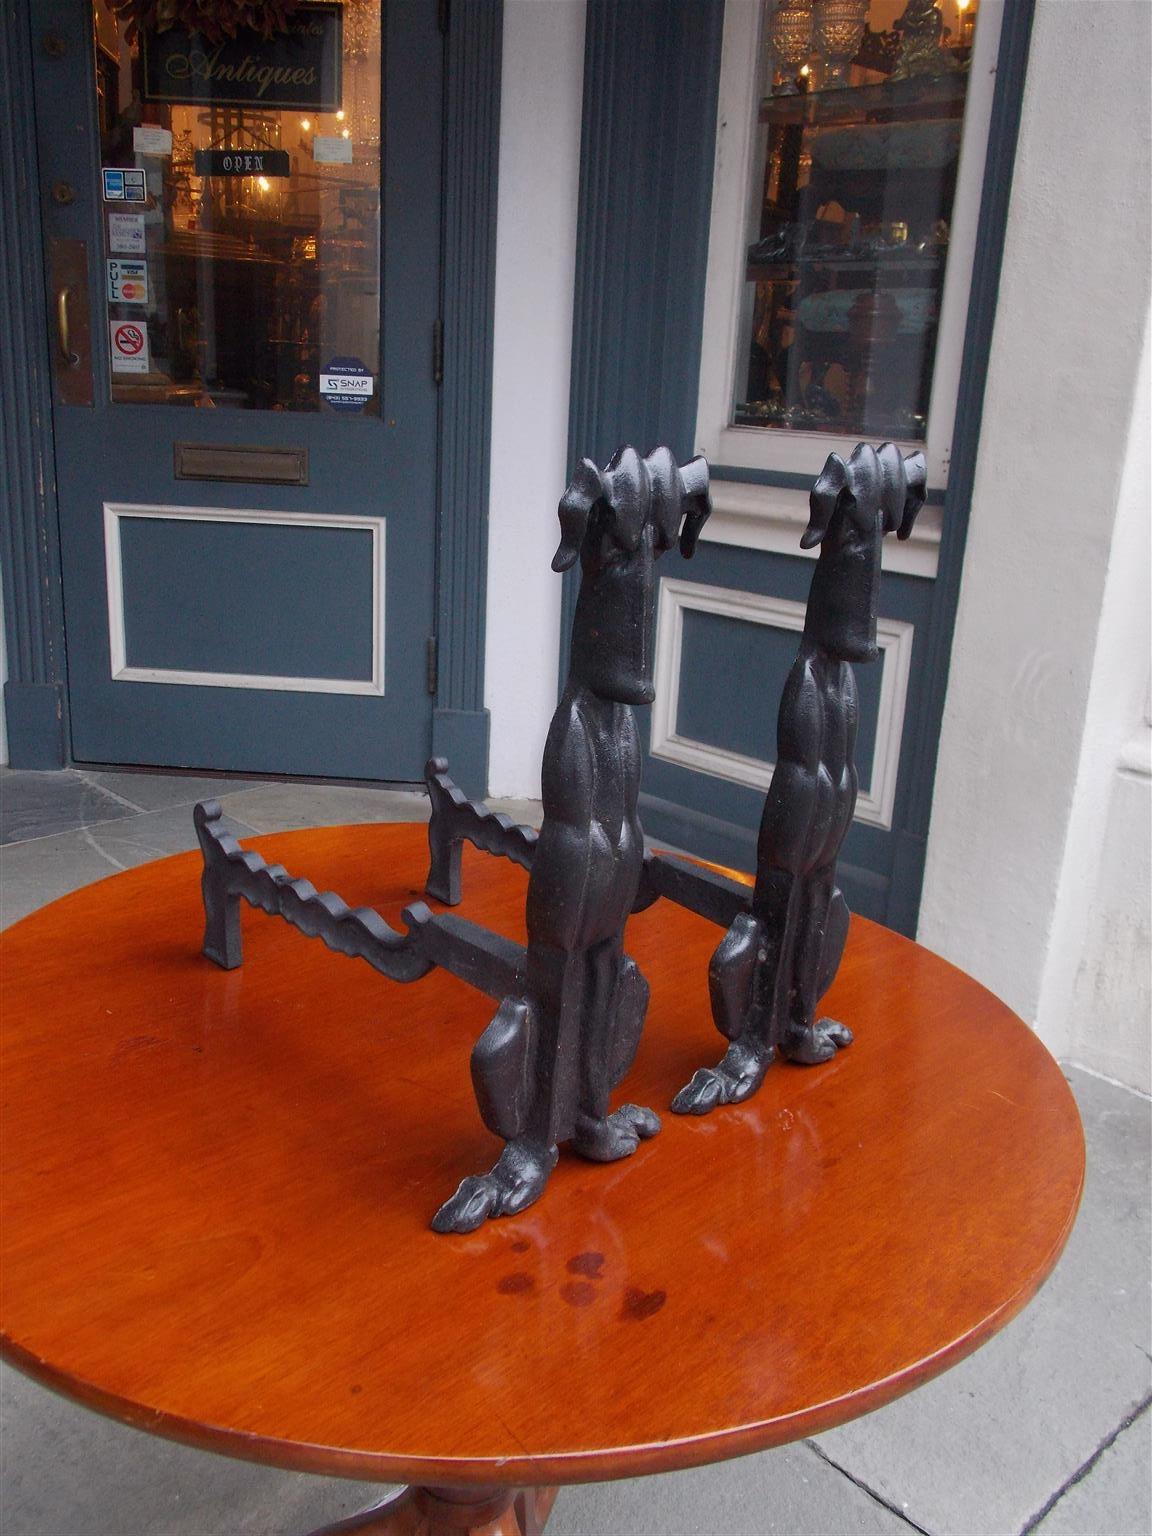 Pair of American Art Deco cast iron sporting dog andirons with the original rear scalloped removable legs, early 20th century.